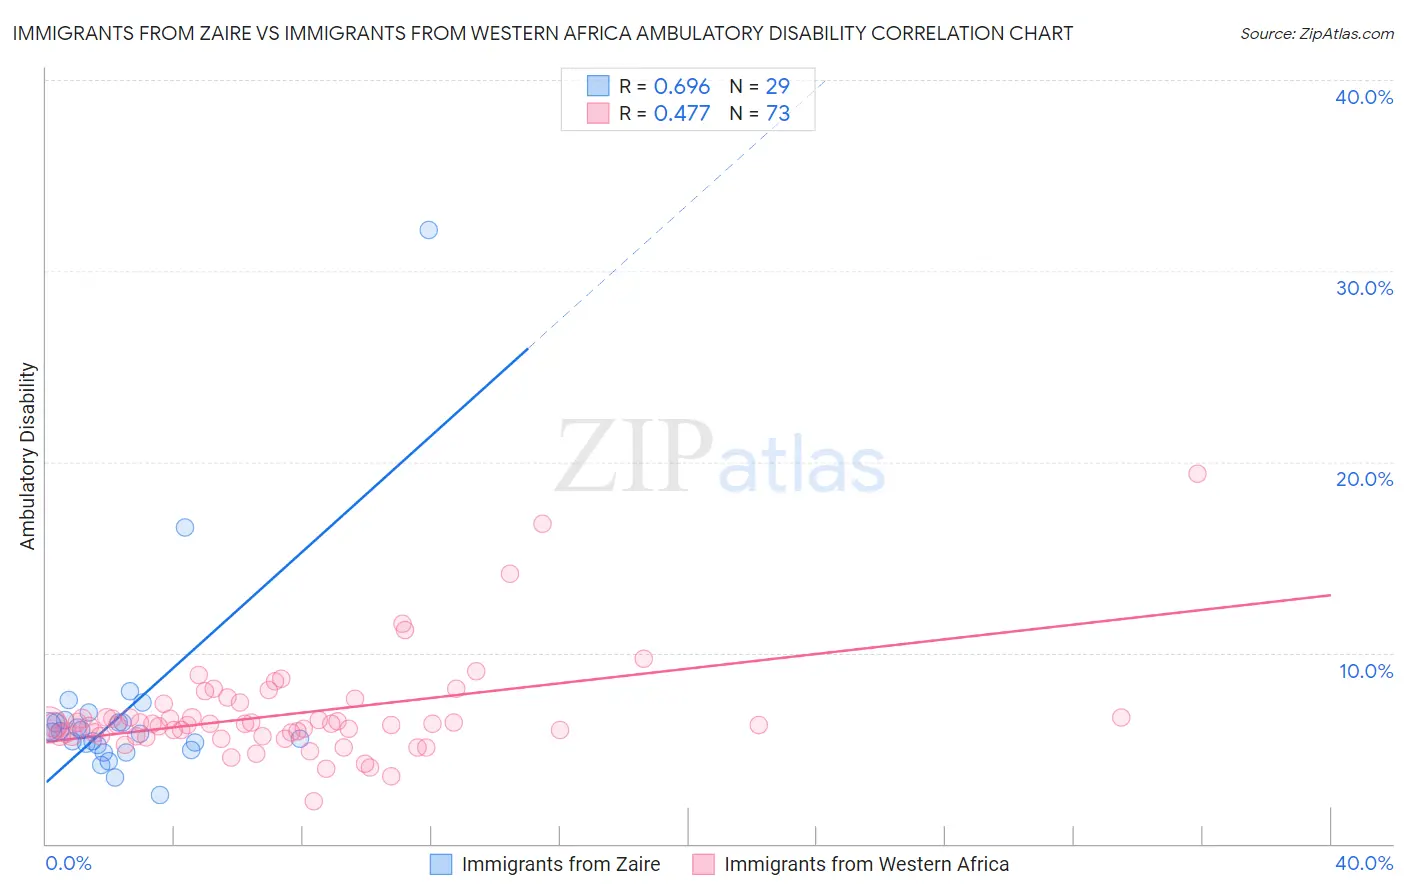 Immigrants from Zaire vs Immigrants from Western Africa Ambulatory Disability